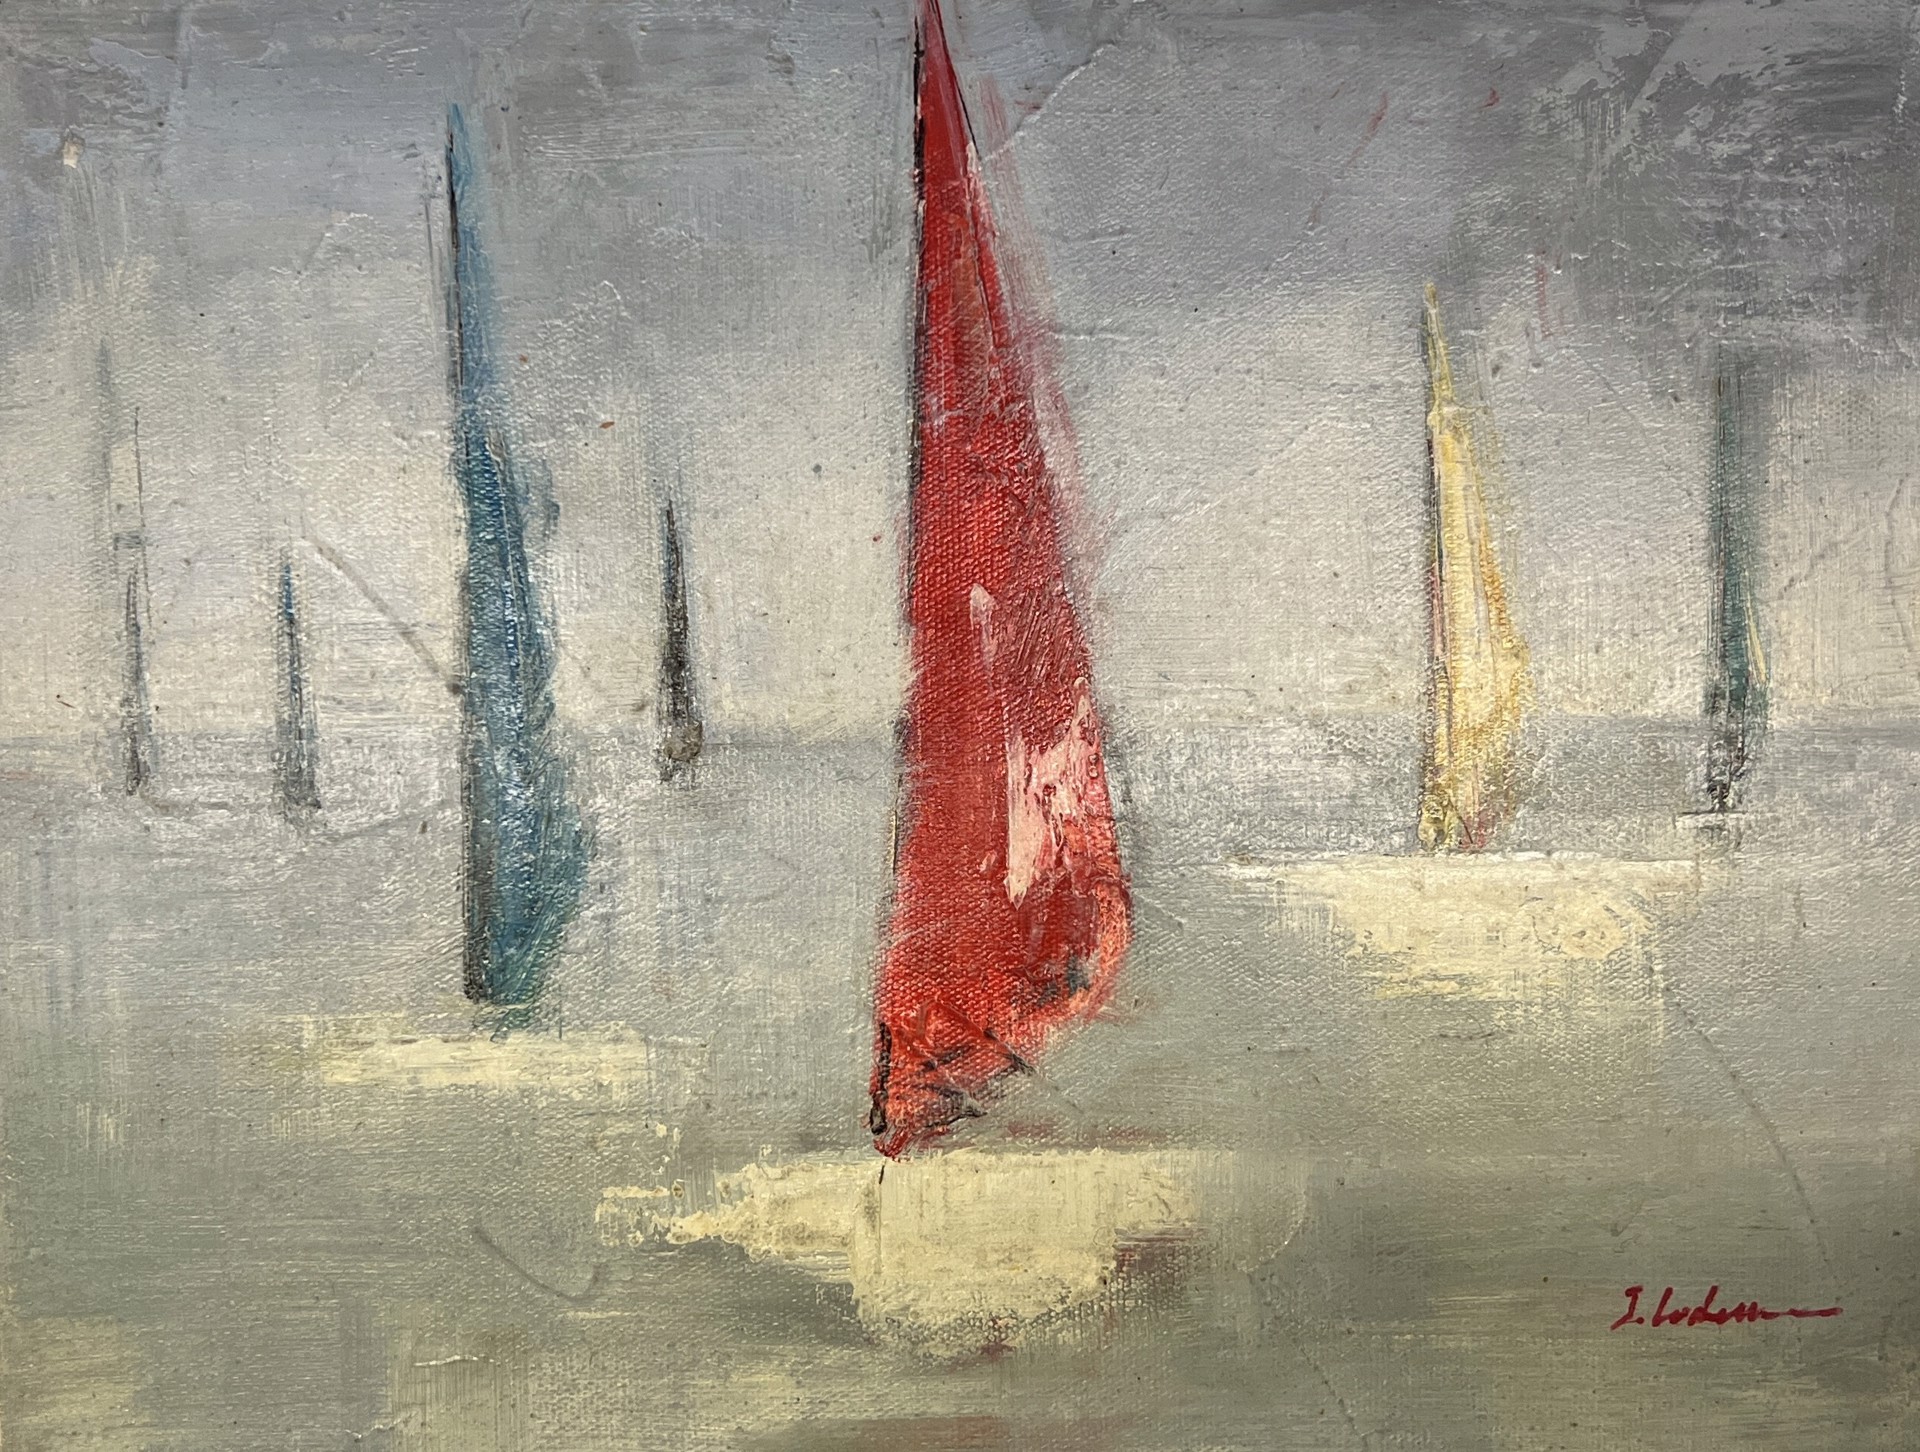 ABSTRACT SAILBOATS by J LODEN